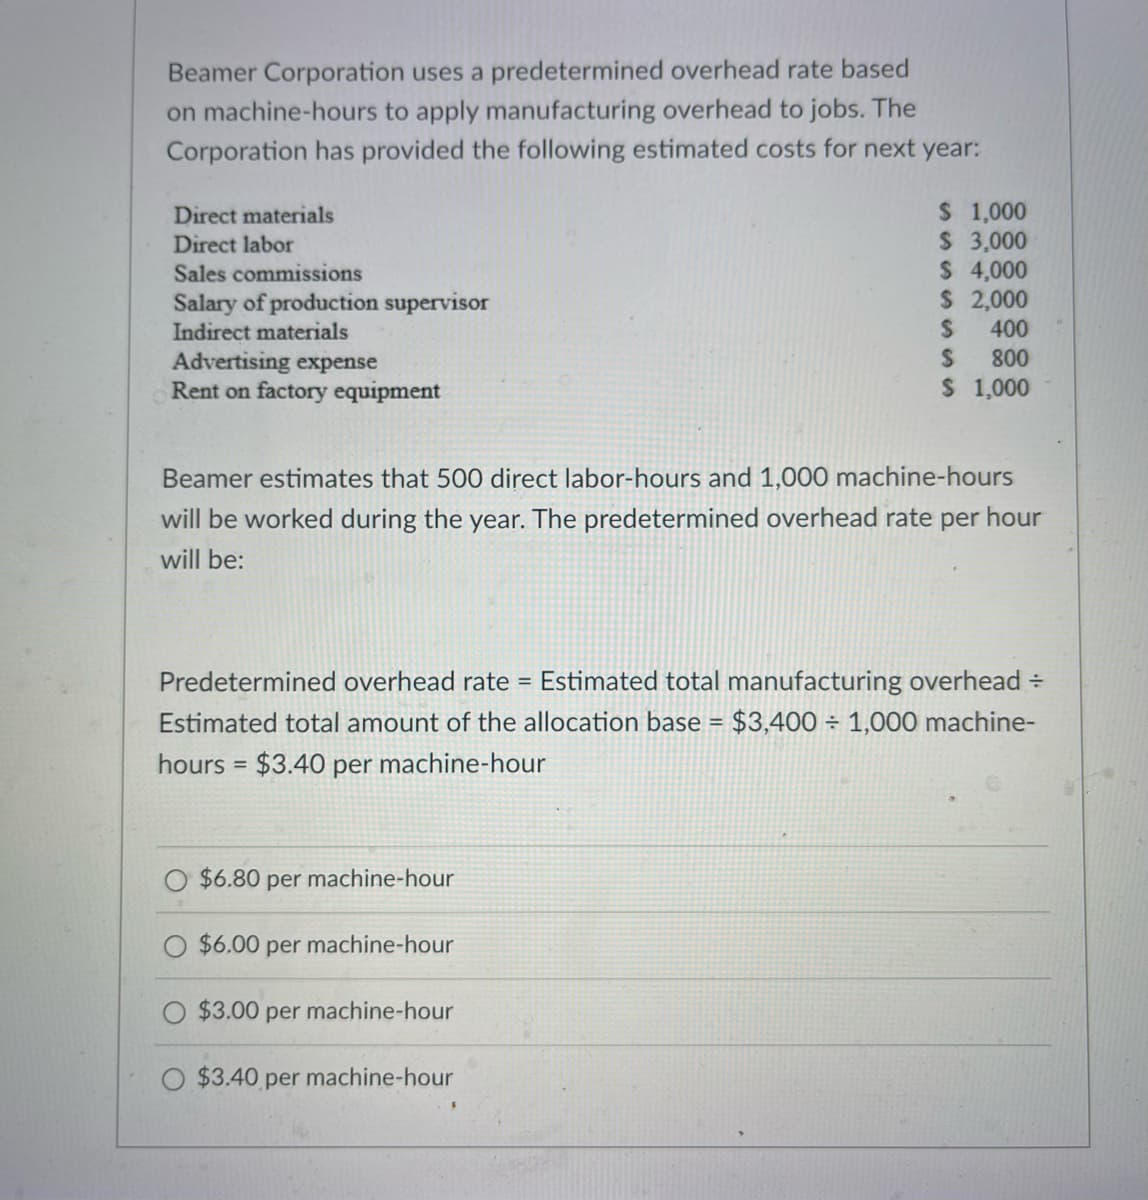 Beamer Corporation uses a predetermined overhead rate based
on machine-hours to apply manufacturing overhead to jobs. The
Corporation has provided the following estimated costs for next year:
Direct materials
Direct labor
Sales commissions
Salary of production supervisor
Indirect materials
Advertising expense
Rent on factory equipment
$ 1,000
$ 3,000
$ 4,000
$ 2,000
S
400
$
800
$ 1,000
Beamer estimates that 500 direct labor-hours and 1,000 machine-hours
will be worked during the year. The predetermined overhead rate per hour
will be:
Predetermined overhead rate = Estimated total manufacturing overhead =
Estimated total amount of the allocation base = $3,400 1,000 machine-
hours = $3.40 per machine-hour
$6.80 per machine-hour
$6.00 per machine-hour
$3.00 per machine-hour
O $3.40 per machine-hour